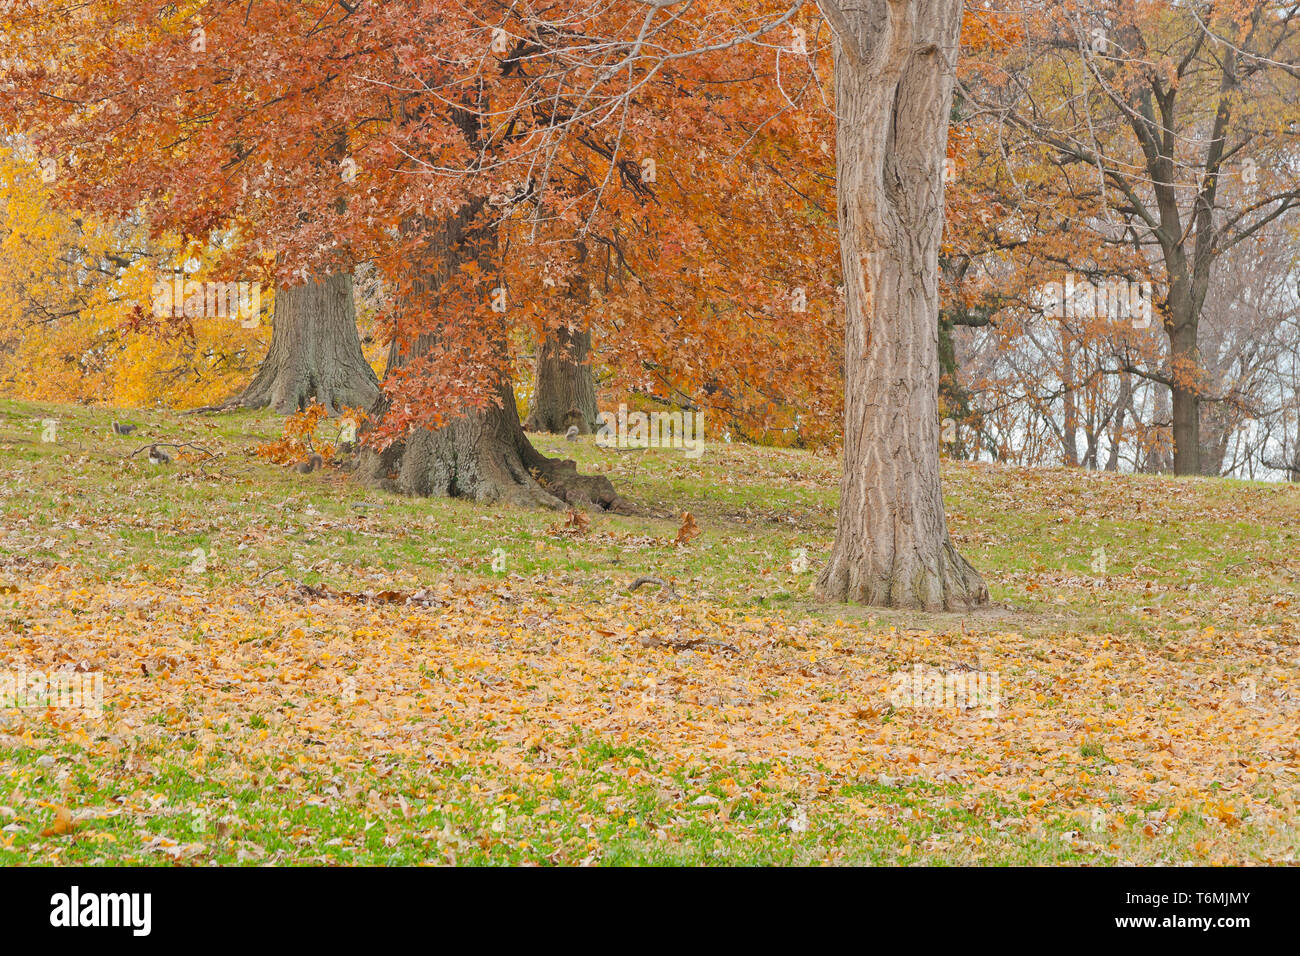 Squirrels scurry about gathering acorns from oak trees on an autumn afternoon at St. Louis Forest Park, among scattered golden leaves of a ginkgo. Stock Photo